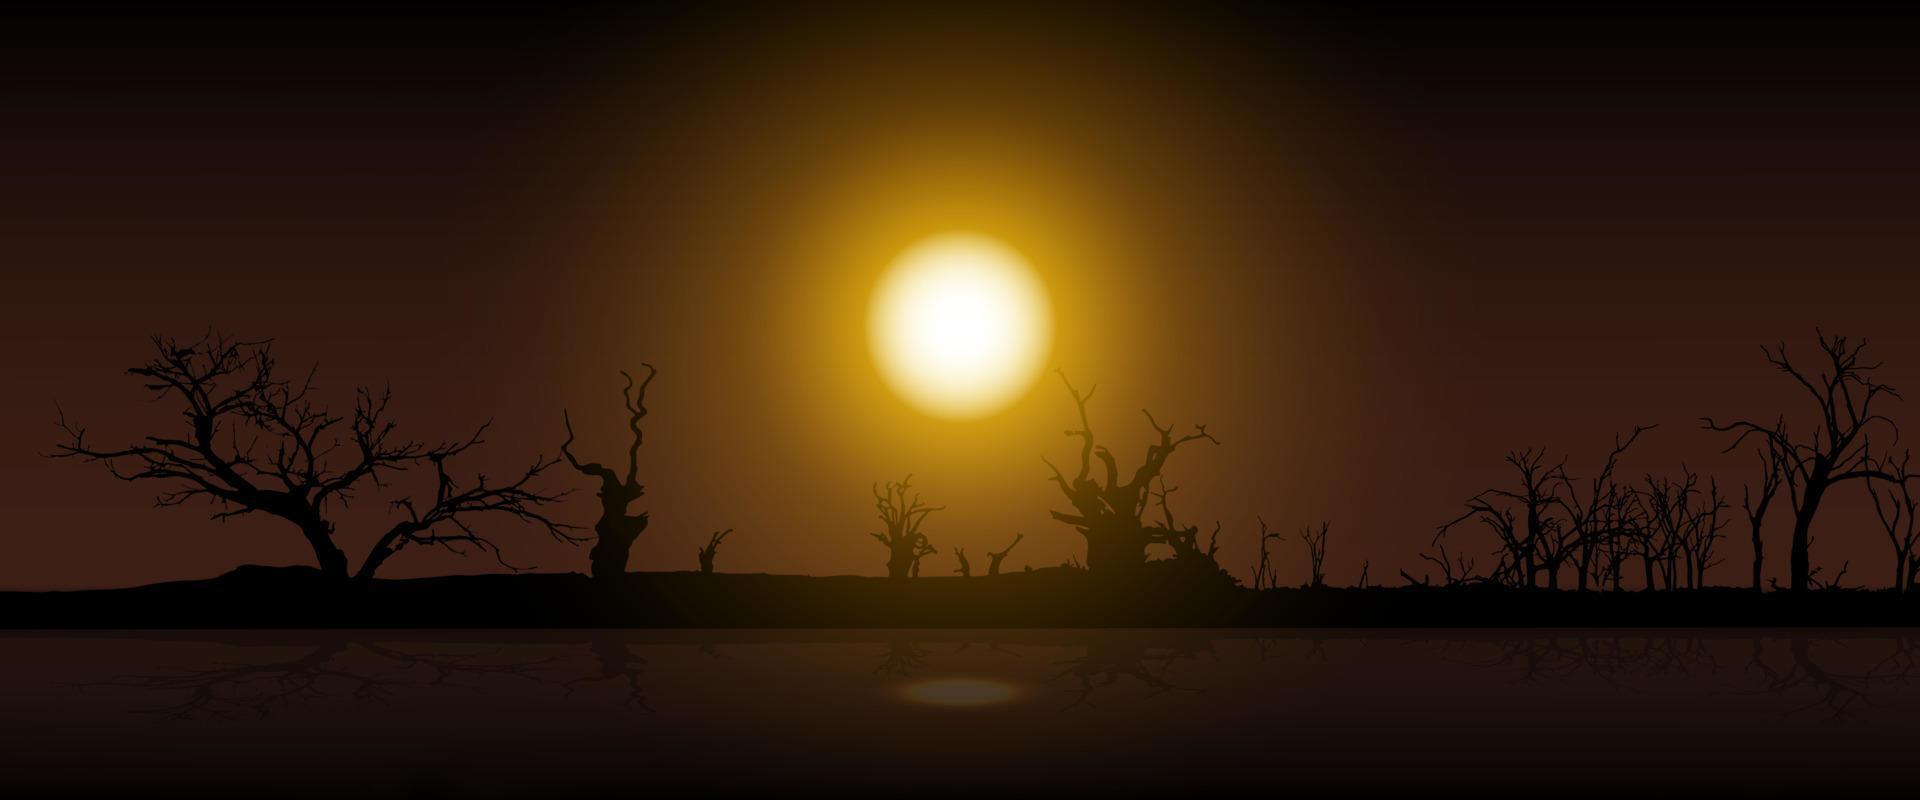 Sunset silhouette dead tree,vector Illustrations background vector